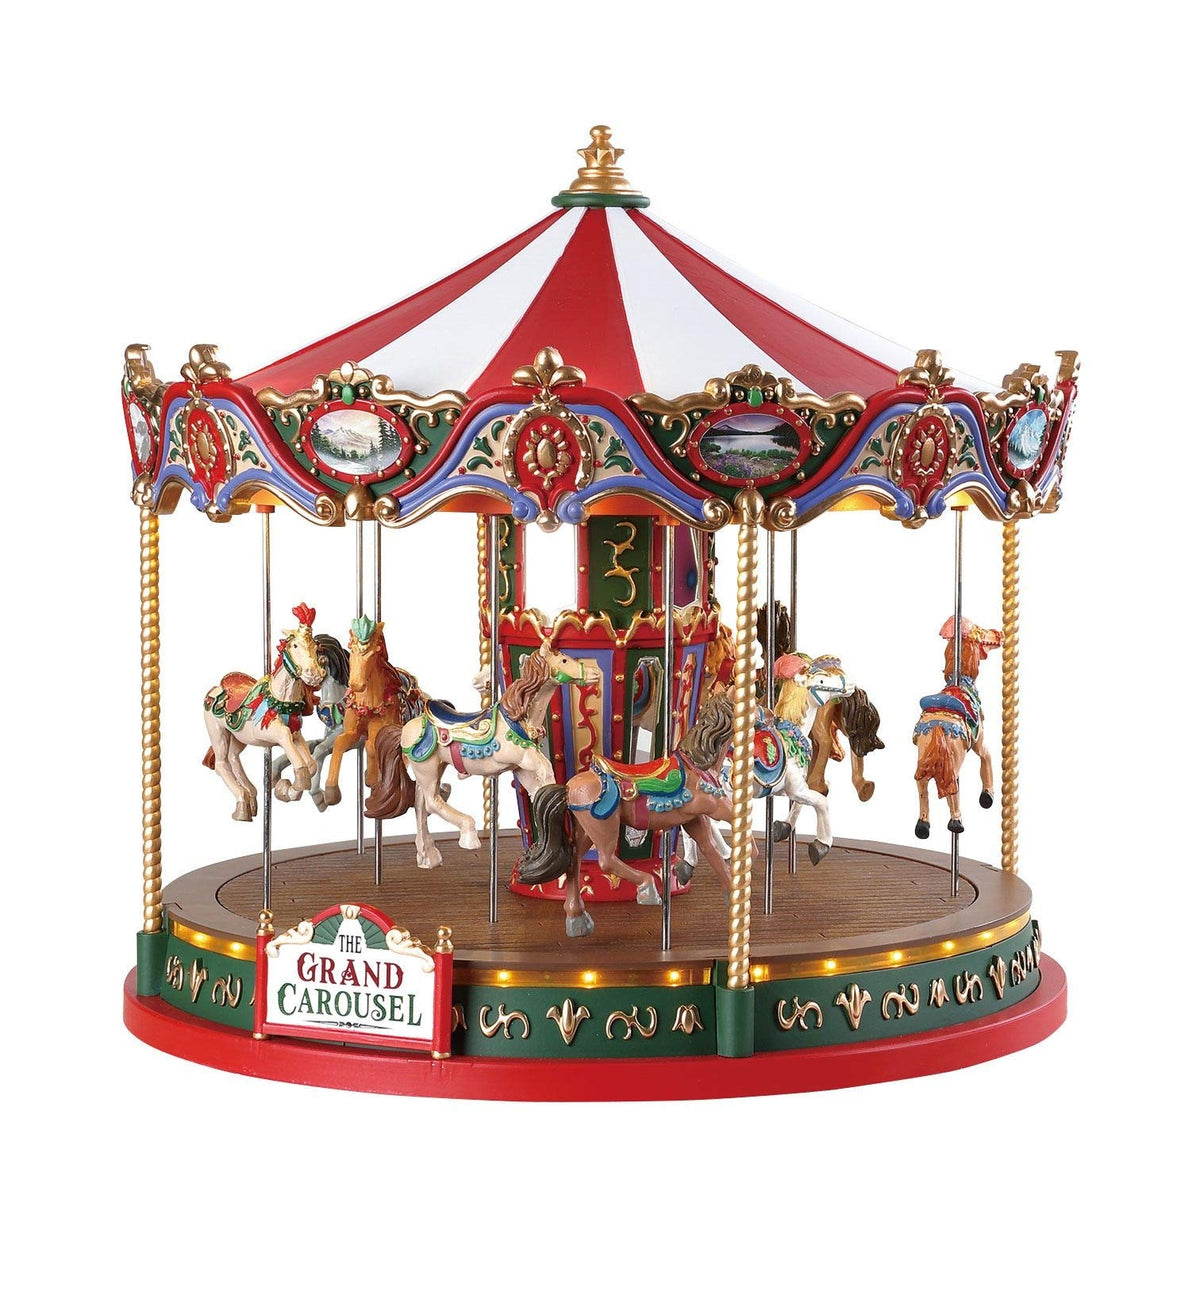 Lemax 84349 The Grand Carousel Christmas Village Accessory, Multicolored